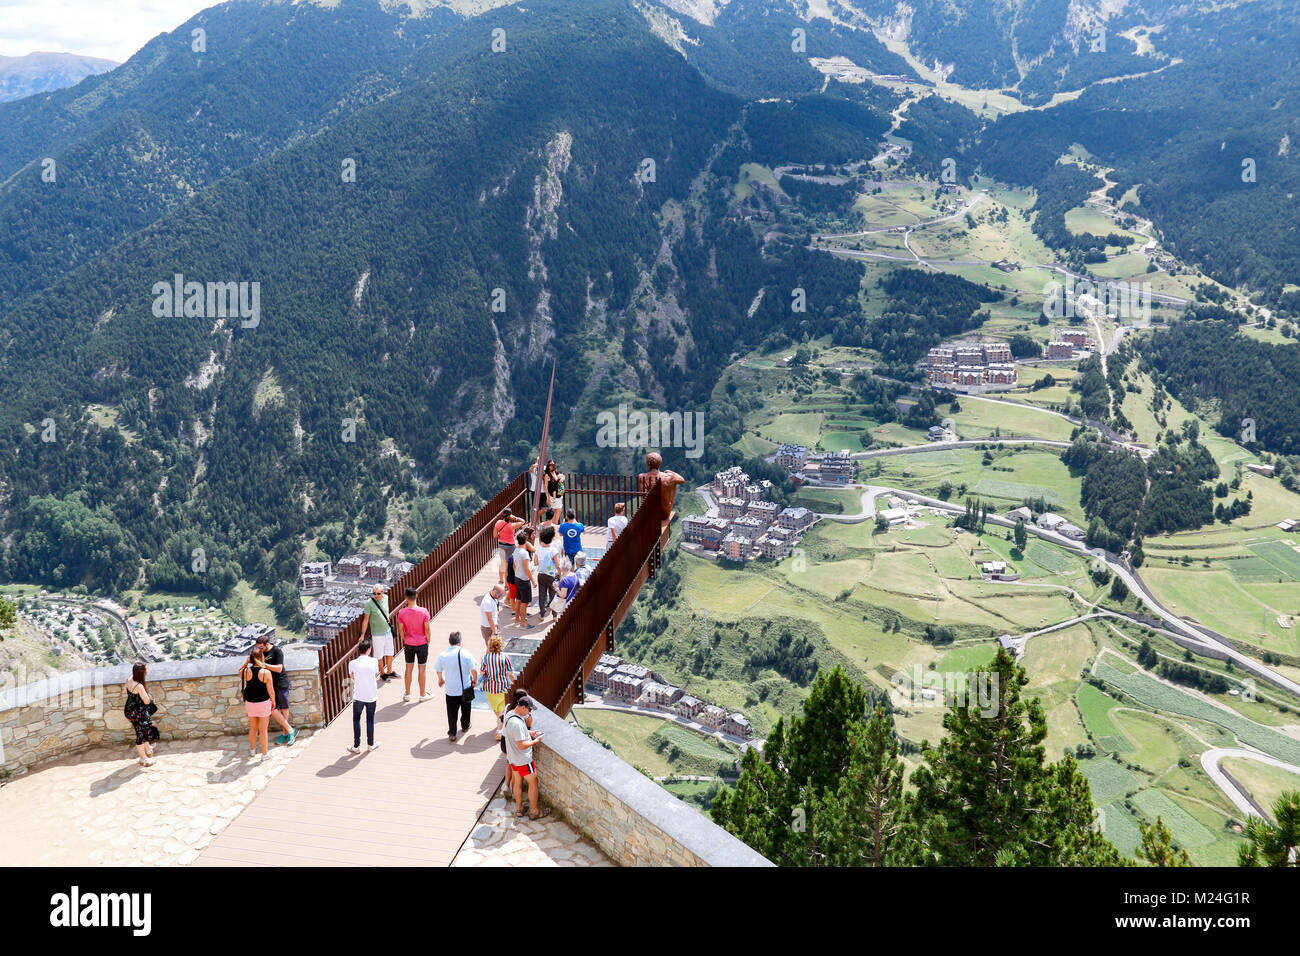 A group of tourists admiring the view of the Valira d'Orient in the Pyrenees Mountains from the Mirador Roc del Quer viewpoint, Canillo, Andorra Stock Photo